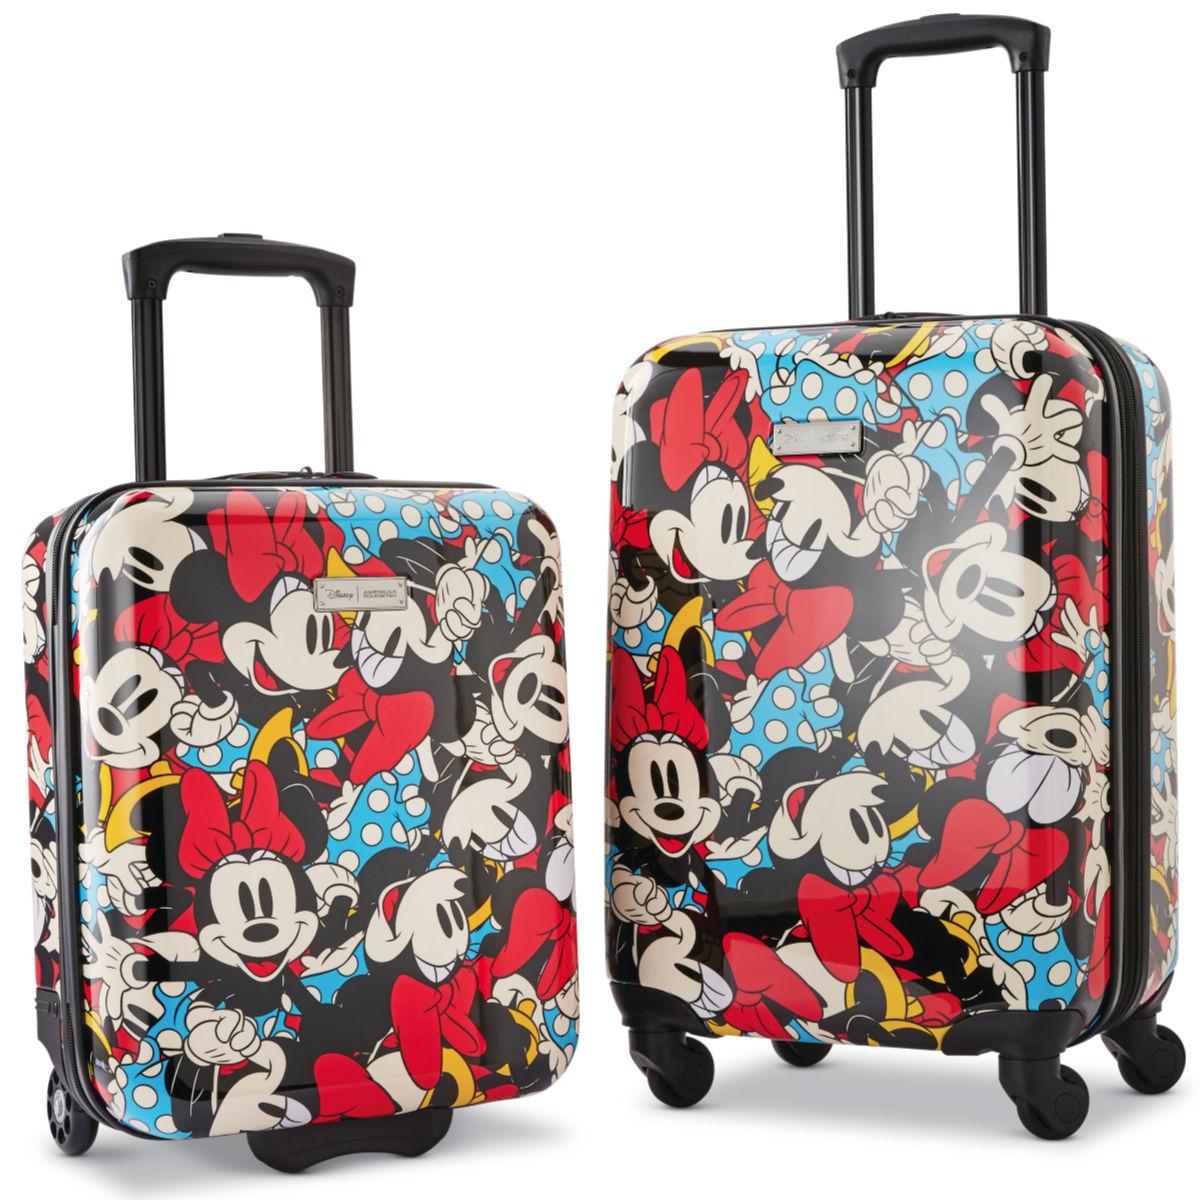 American Tourister Disney Minnie Mouse Hardside Carry-On 2-piece Luggage Set